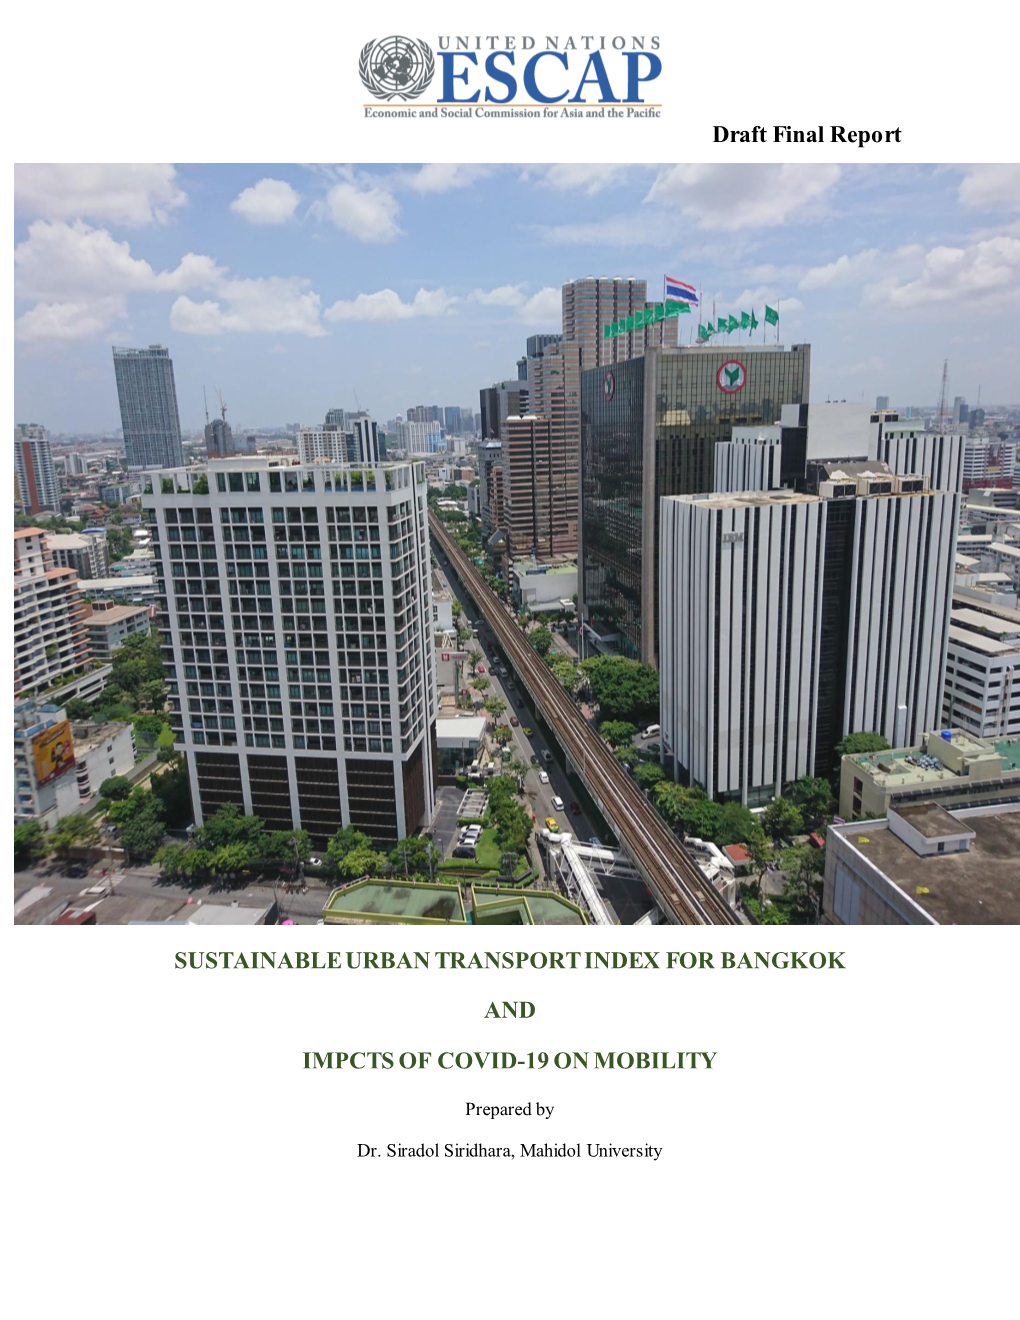 Draft Final Report SUSTAINABLE URBAN TRANSPORT INDEX FOR